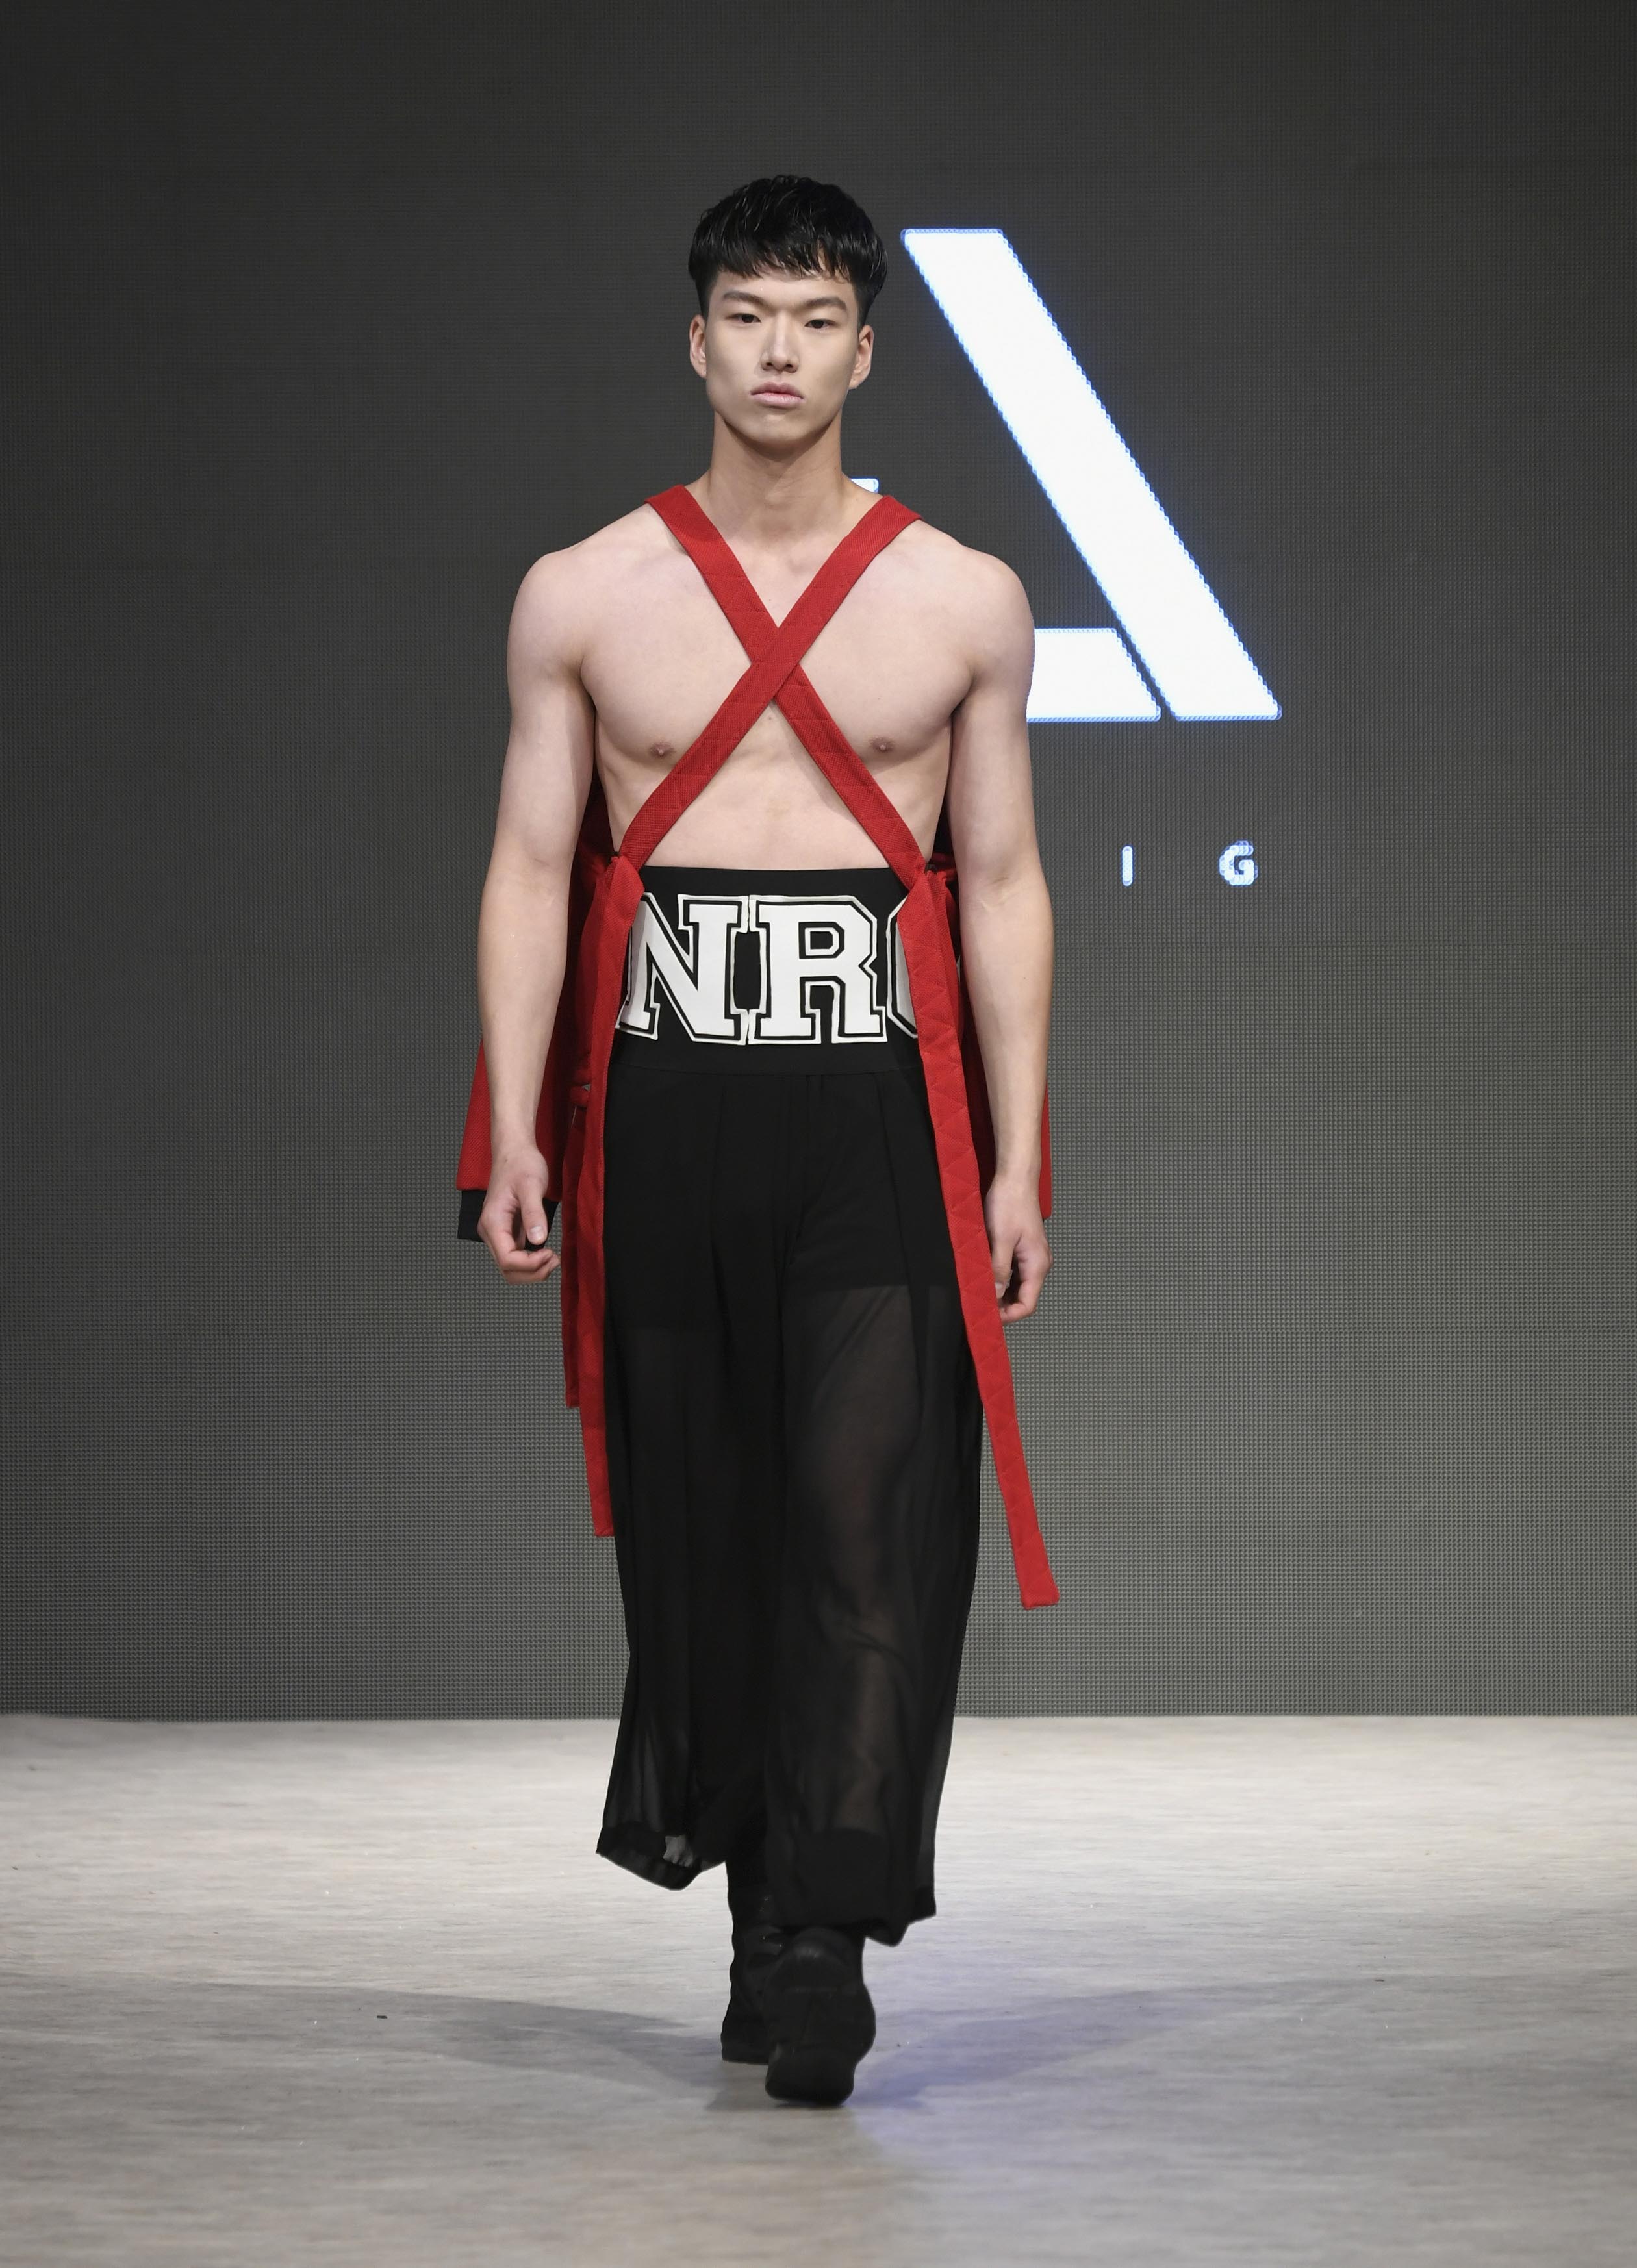 VANCOUVER, BC - SEPTEMBER 21:  A model walks the runway wearing JNORIG at Vancouver Fashion Week Spring/Summer 19 - Day 5 on September 21, 2018 in Vancouver, Canada.  (Photo by Arun Nevader/Getty Images for VFW Management INC)